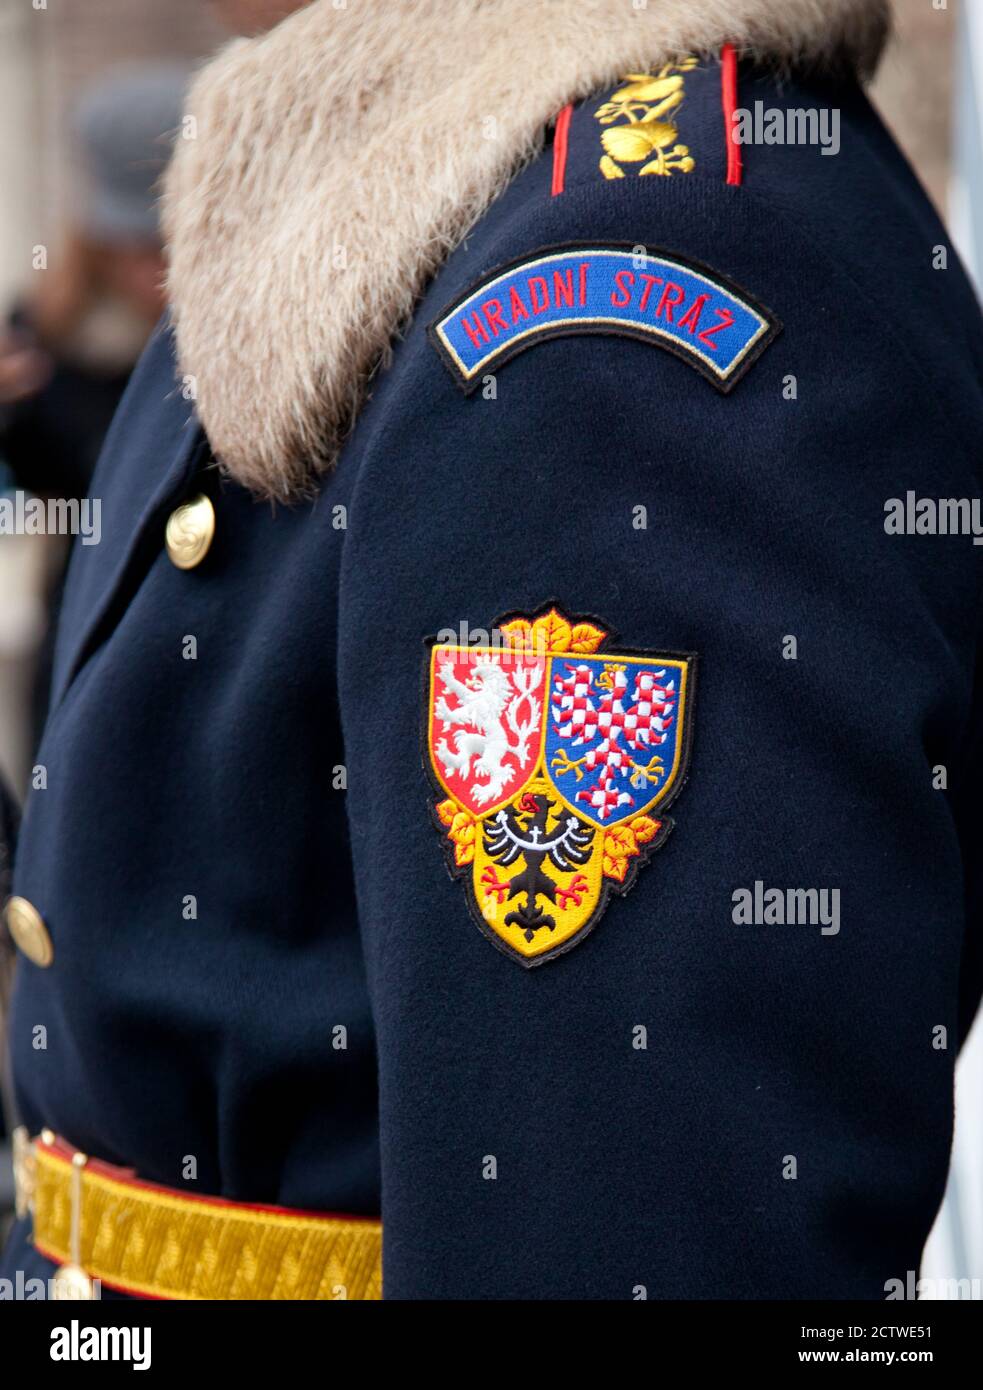 Prague Castle Guard, Hradni Straz in front of the Castle. Hradni Straz is a formal military guard protecting the czech president. Stock Photo